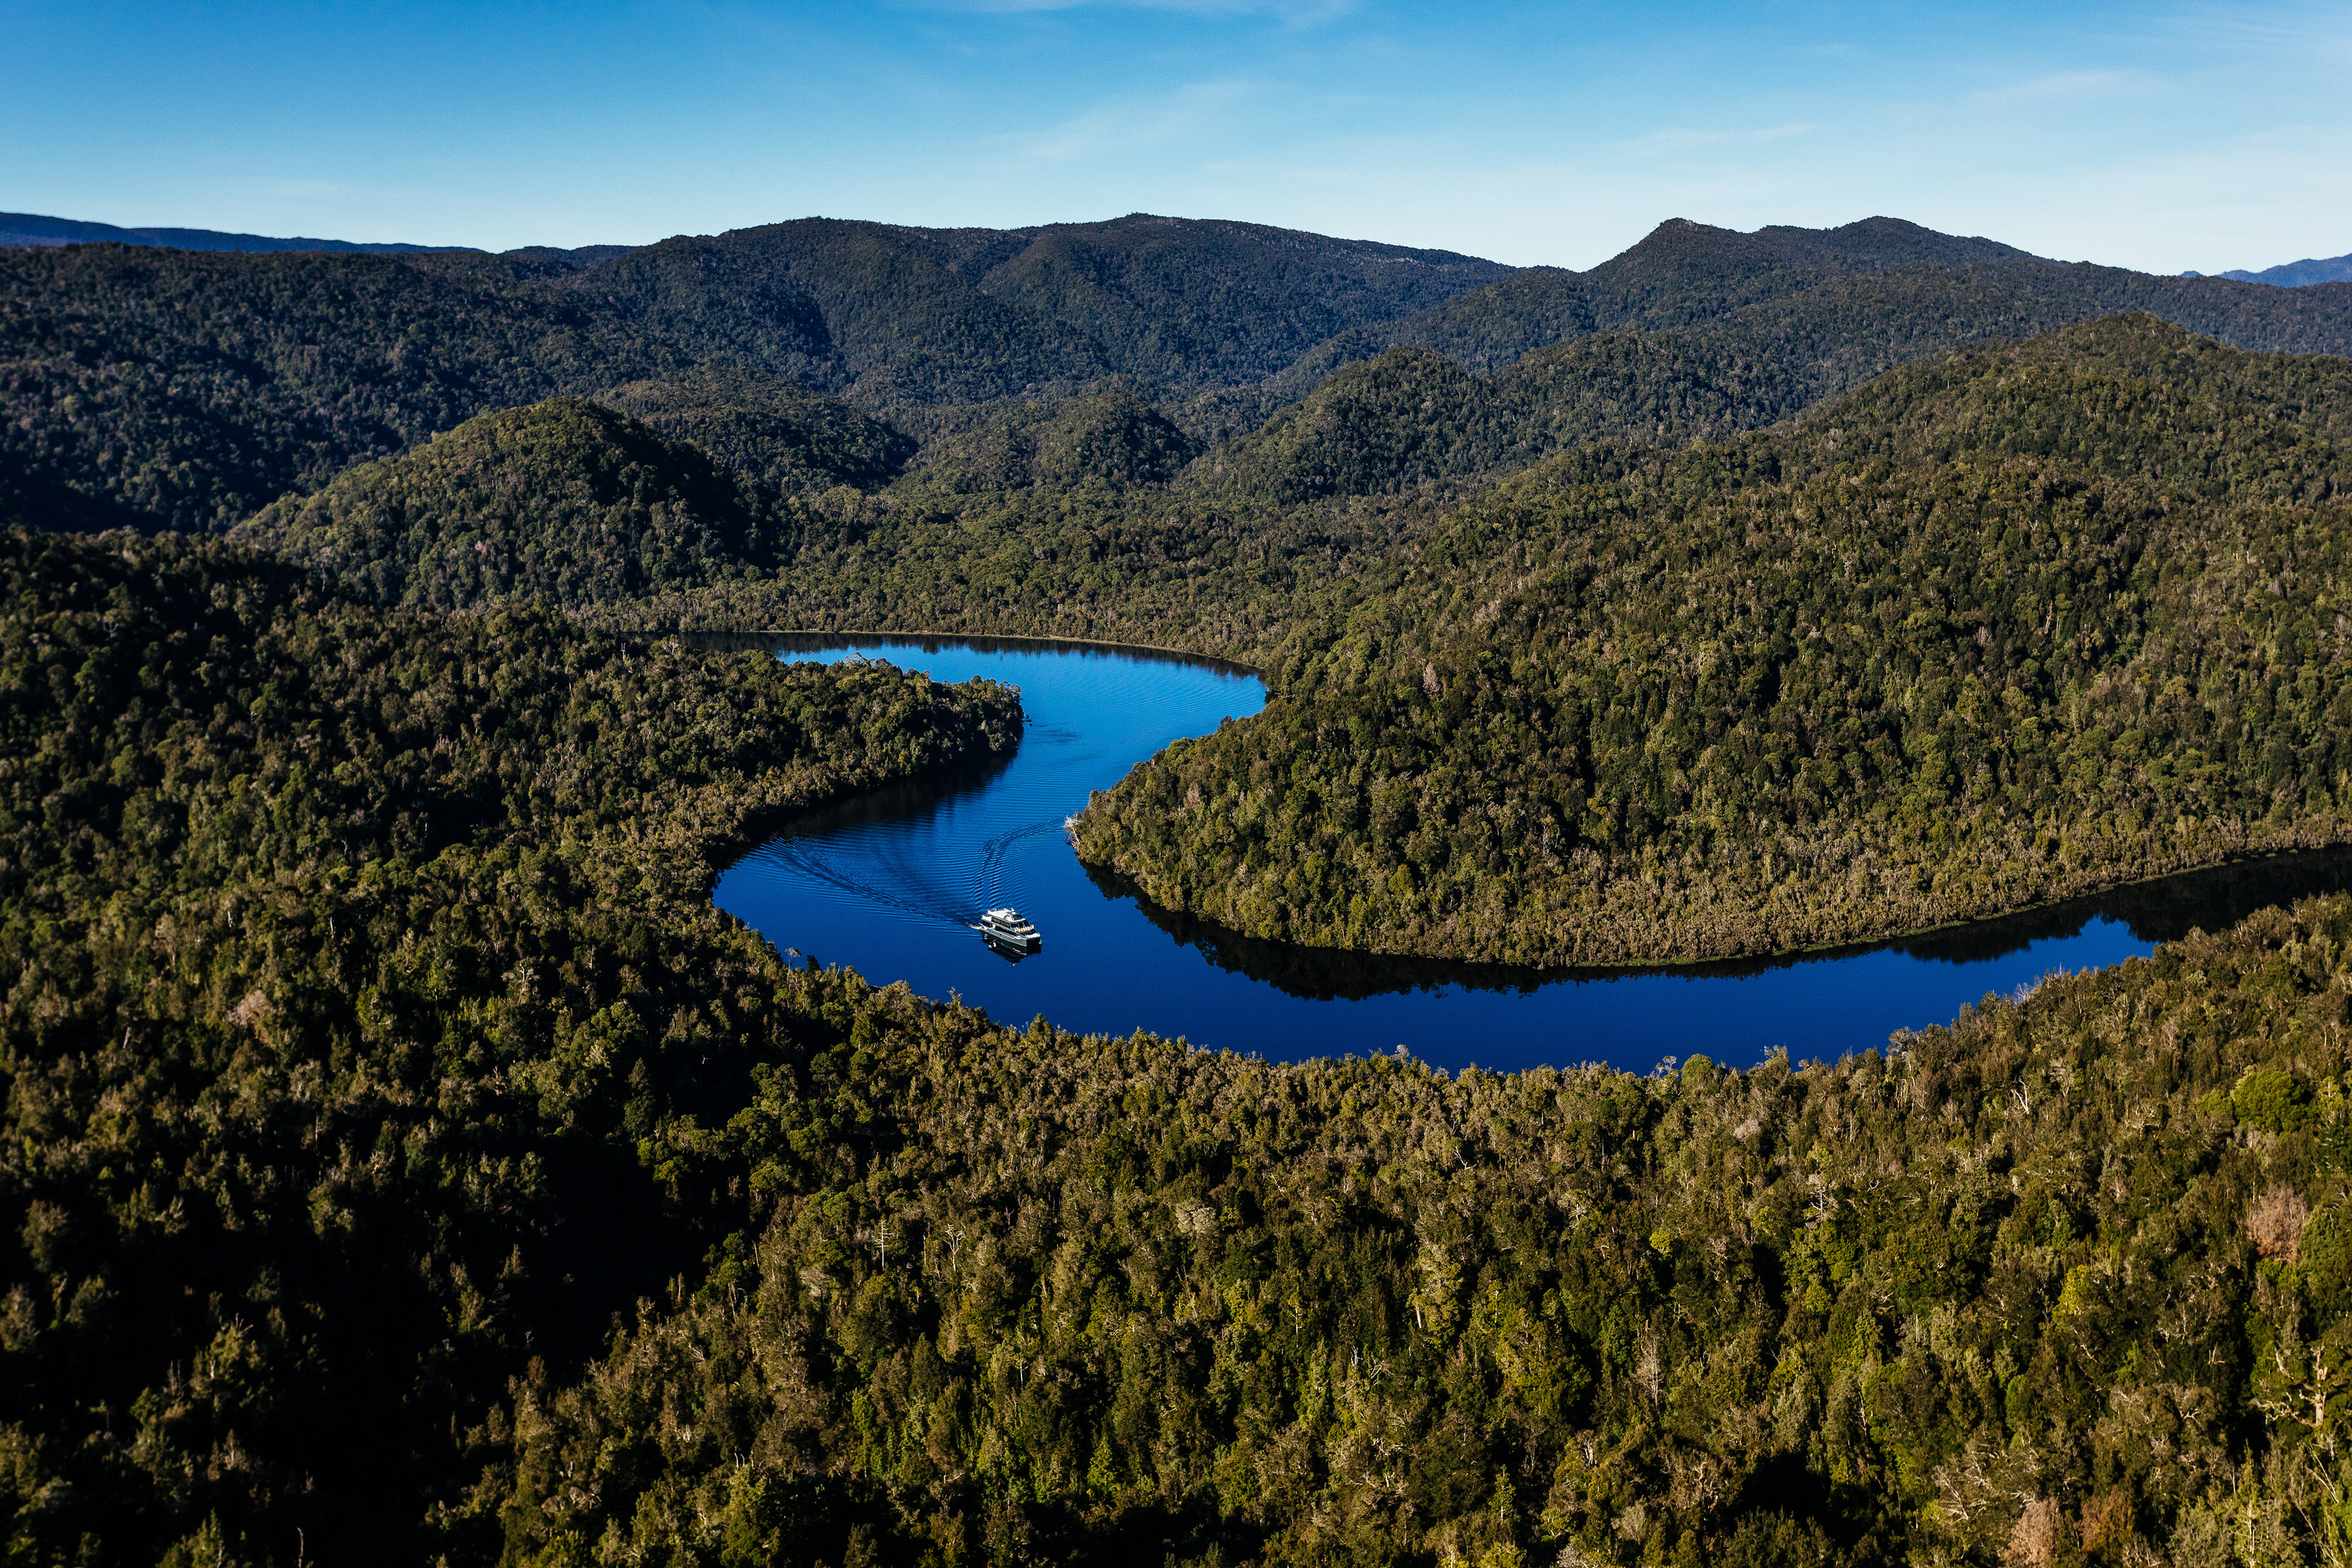 Incredible aerial image of Gordon River Cruises, piloting through Gordon River, surrounded by lush forest on either side of the river.